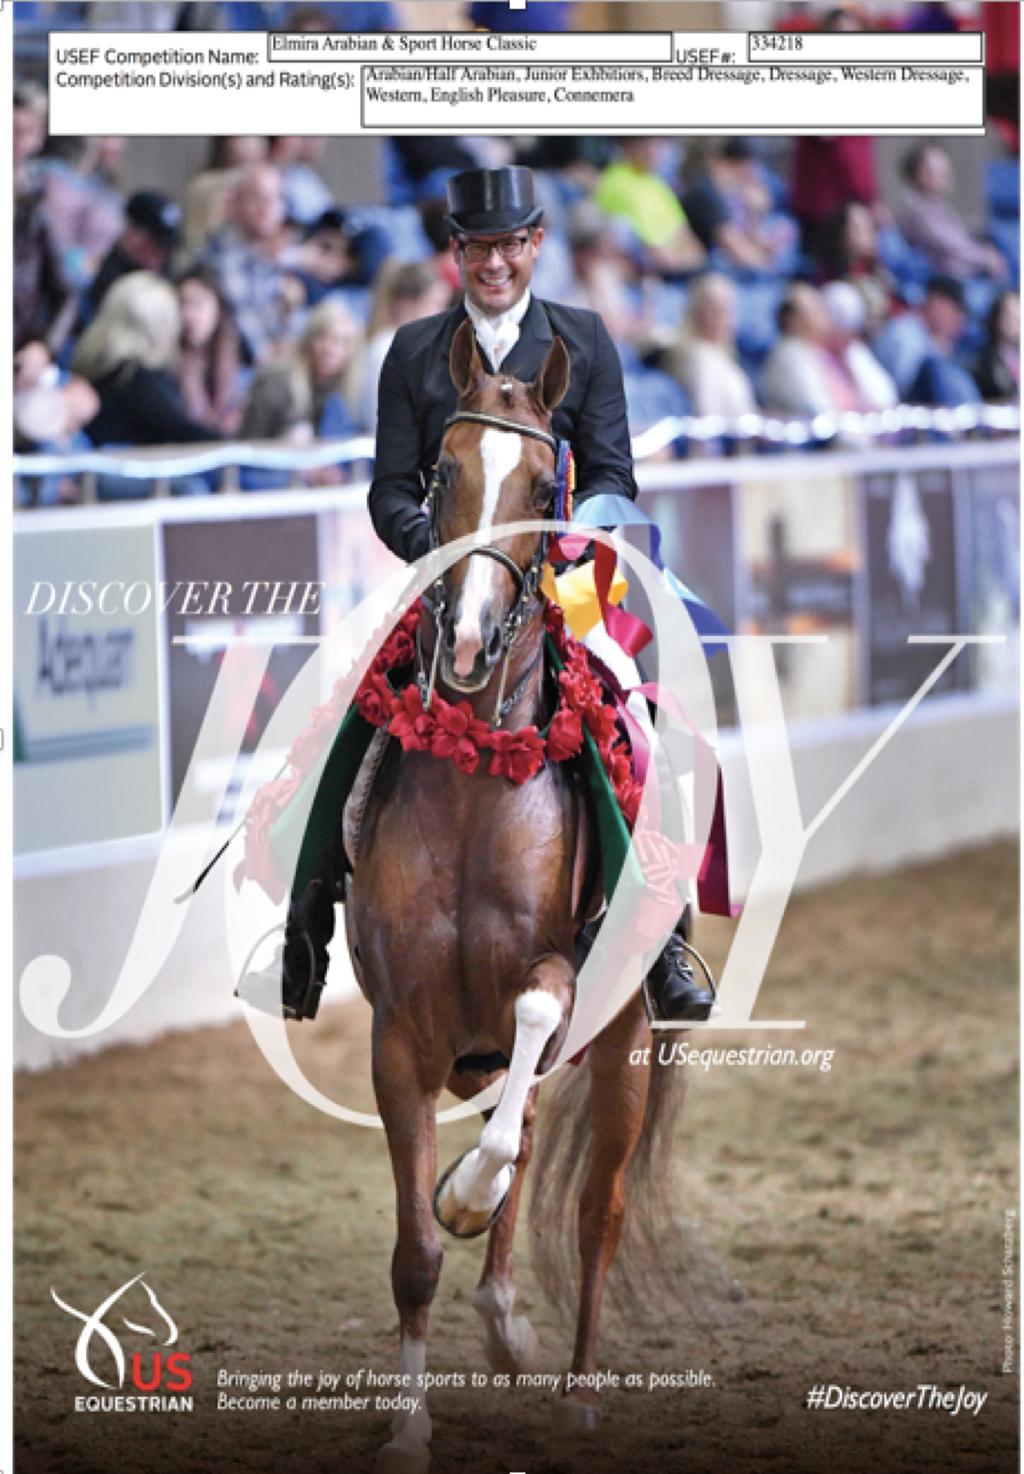 An Adult Amateur Equitation Regional Final class will be held at each of the nine USDF Regional Dressage Championship competitions, providing adult amateurs with additional opportunity for